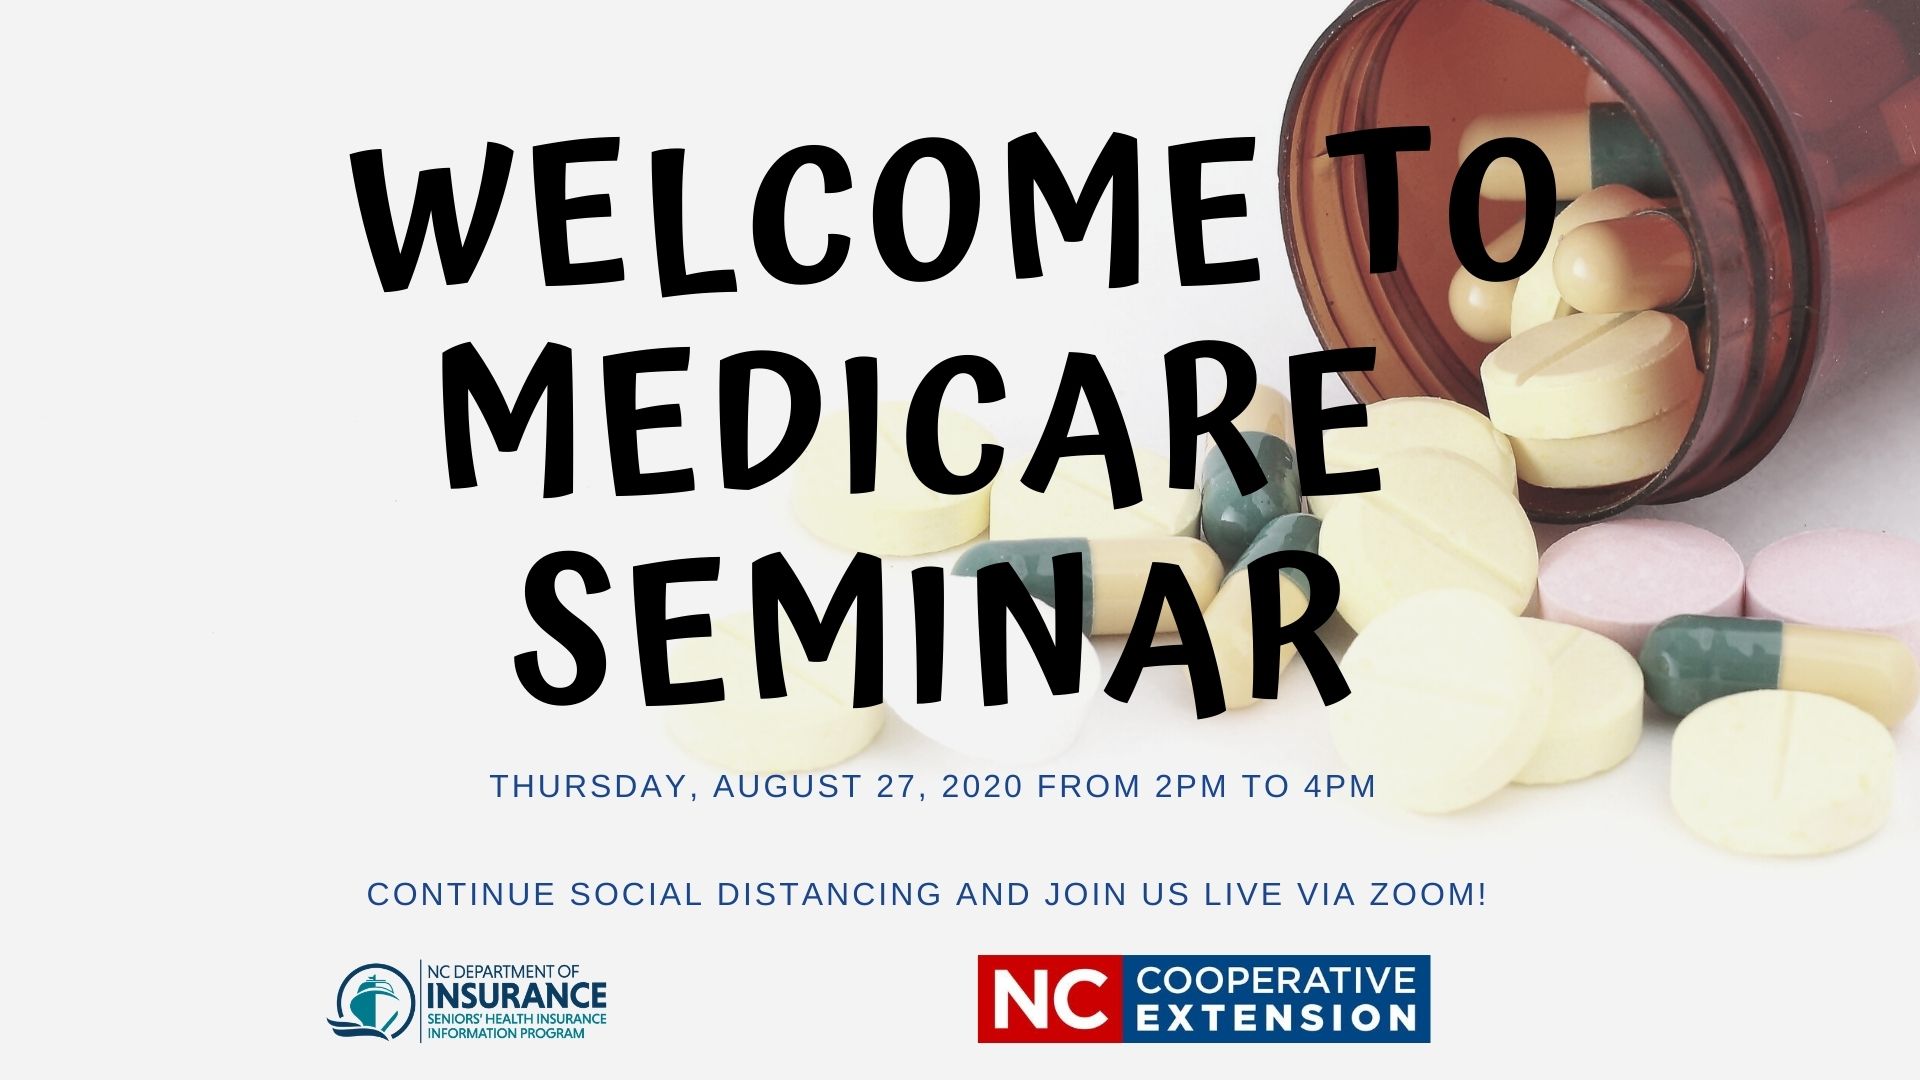 Welcome to Medicare seminar flyer